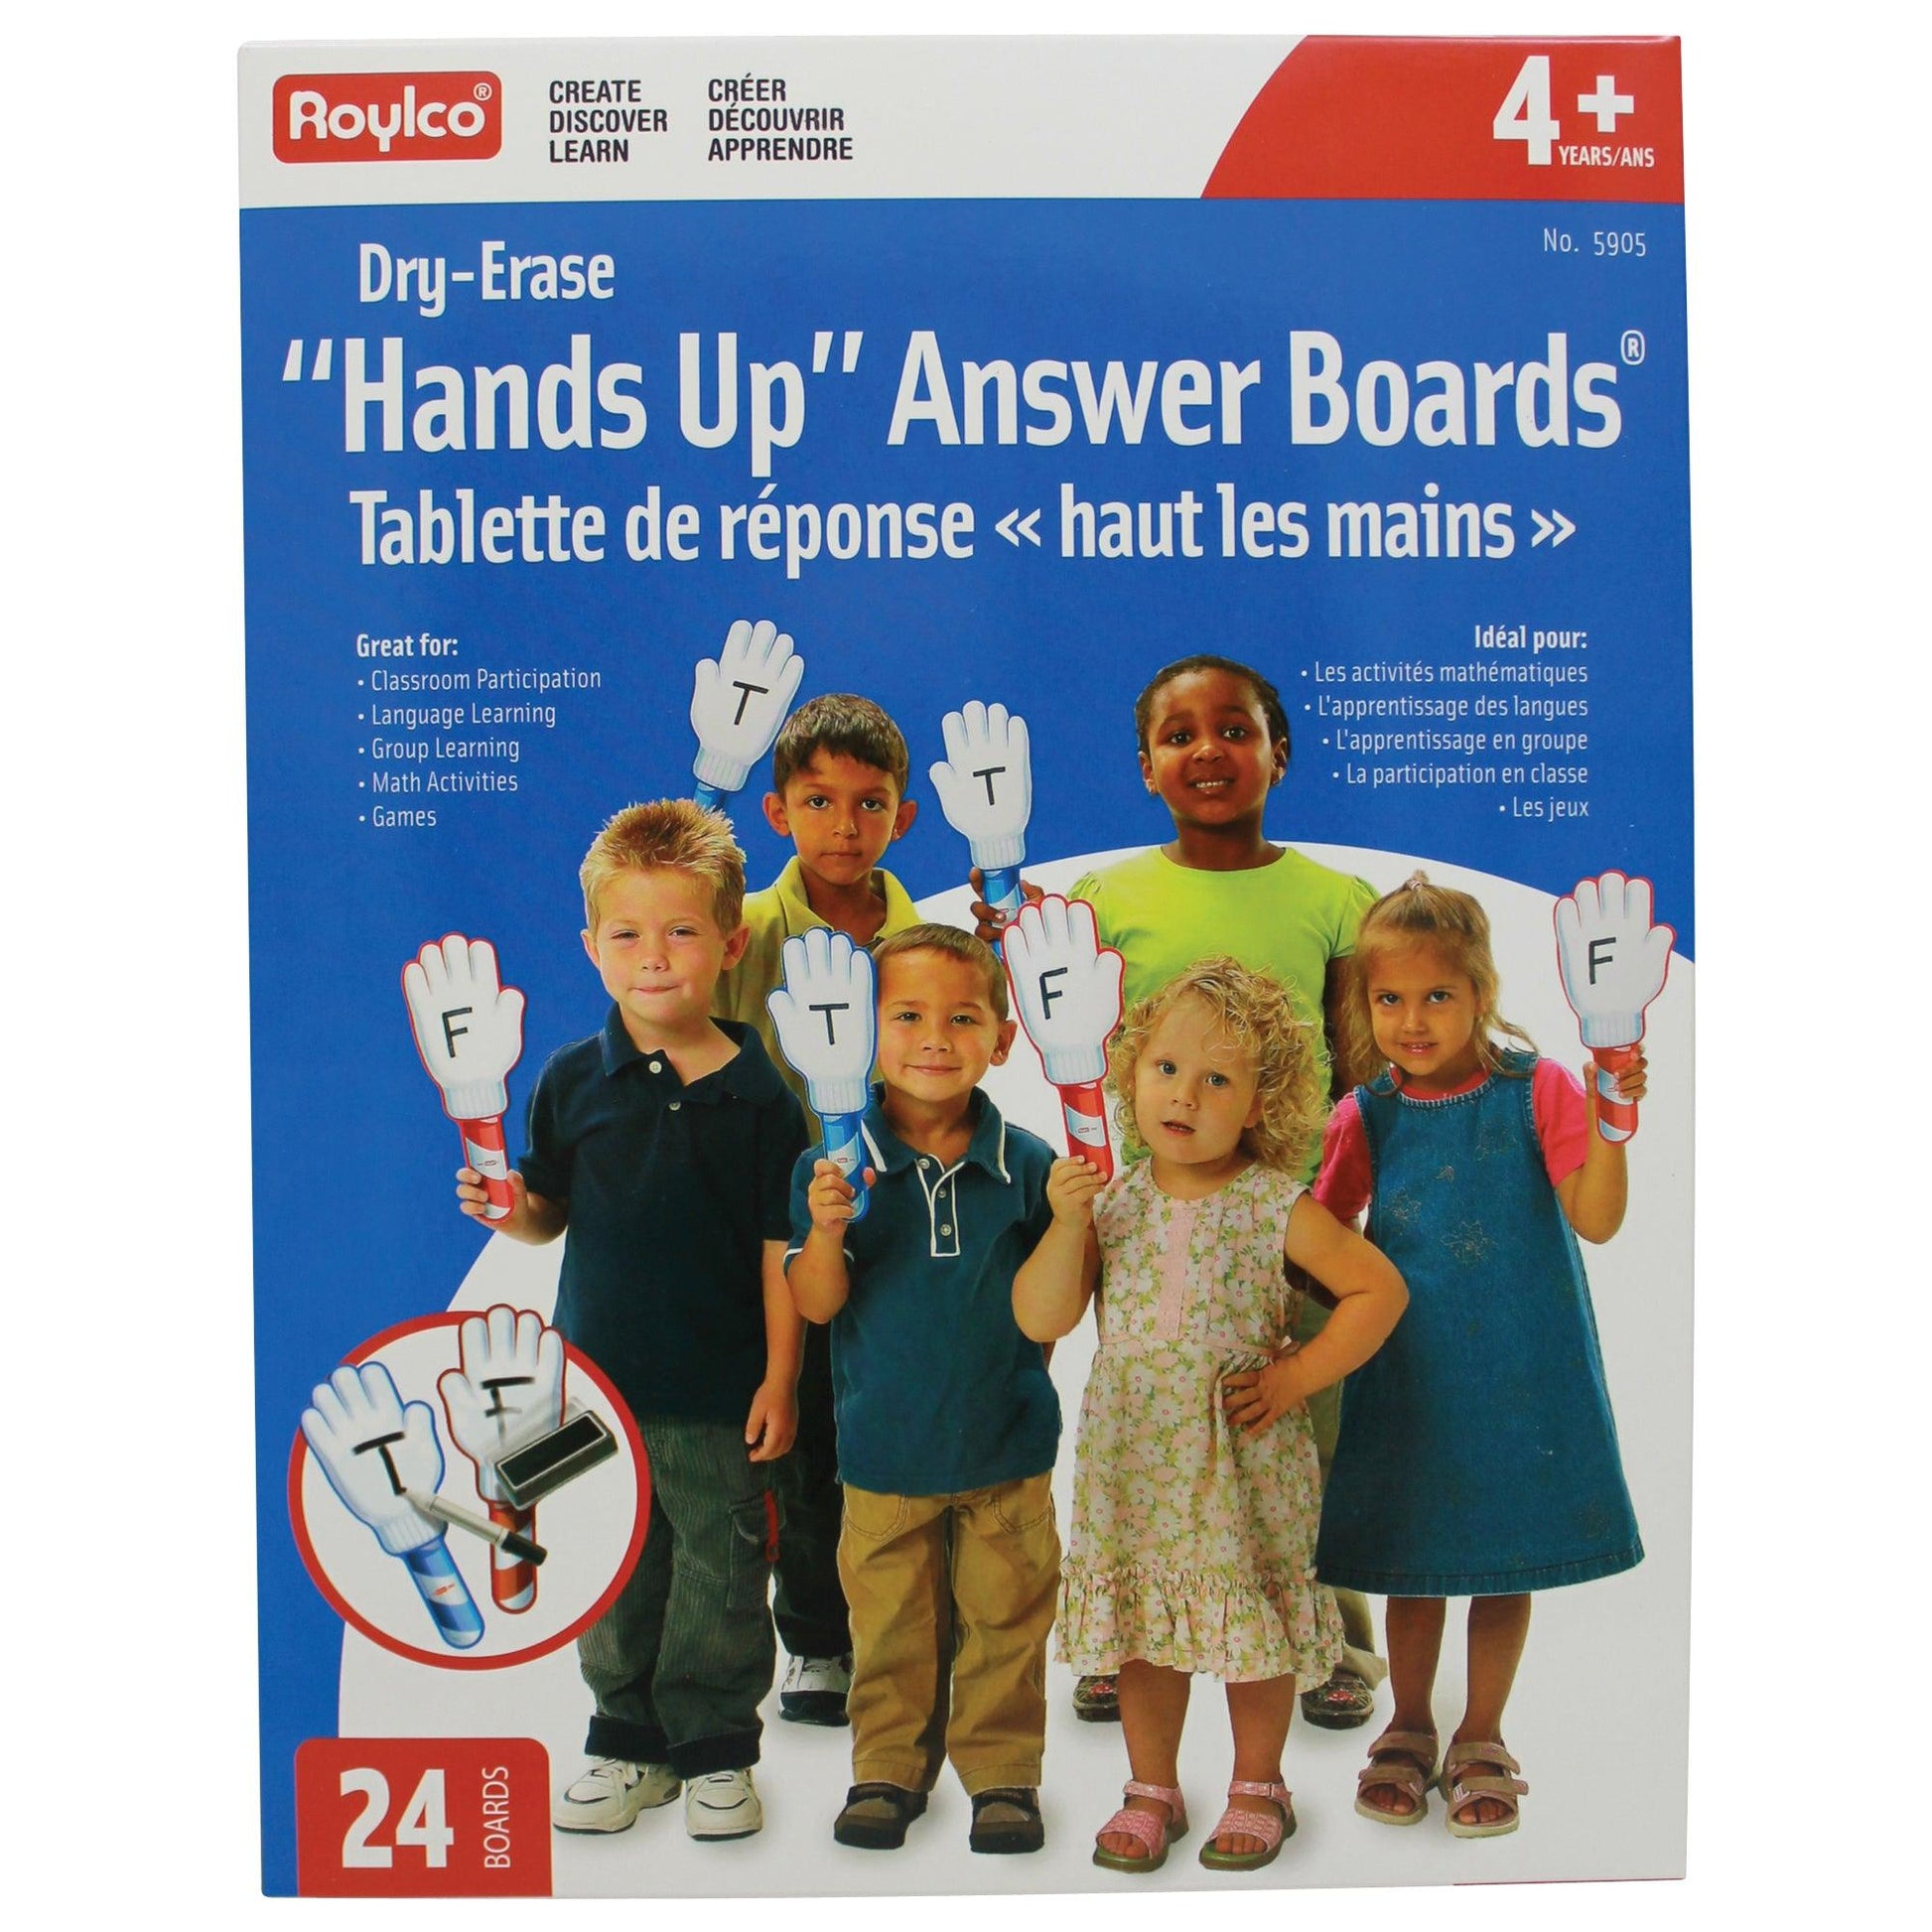 Hands Up Dry Erase Answer Boards®, Pack of 24 - Loomini